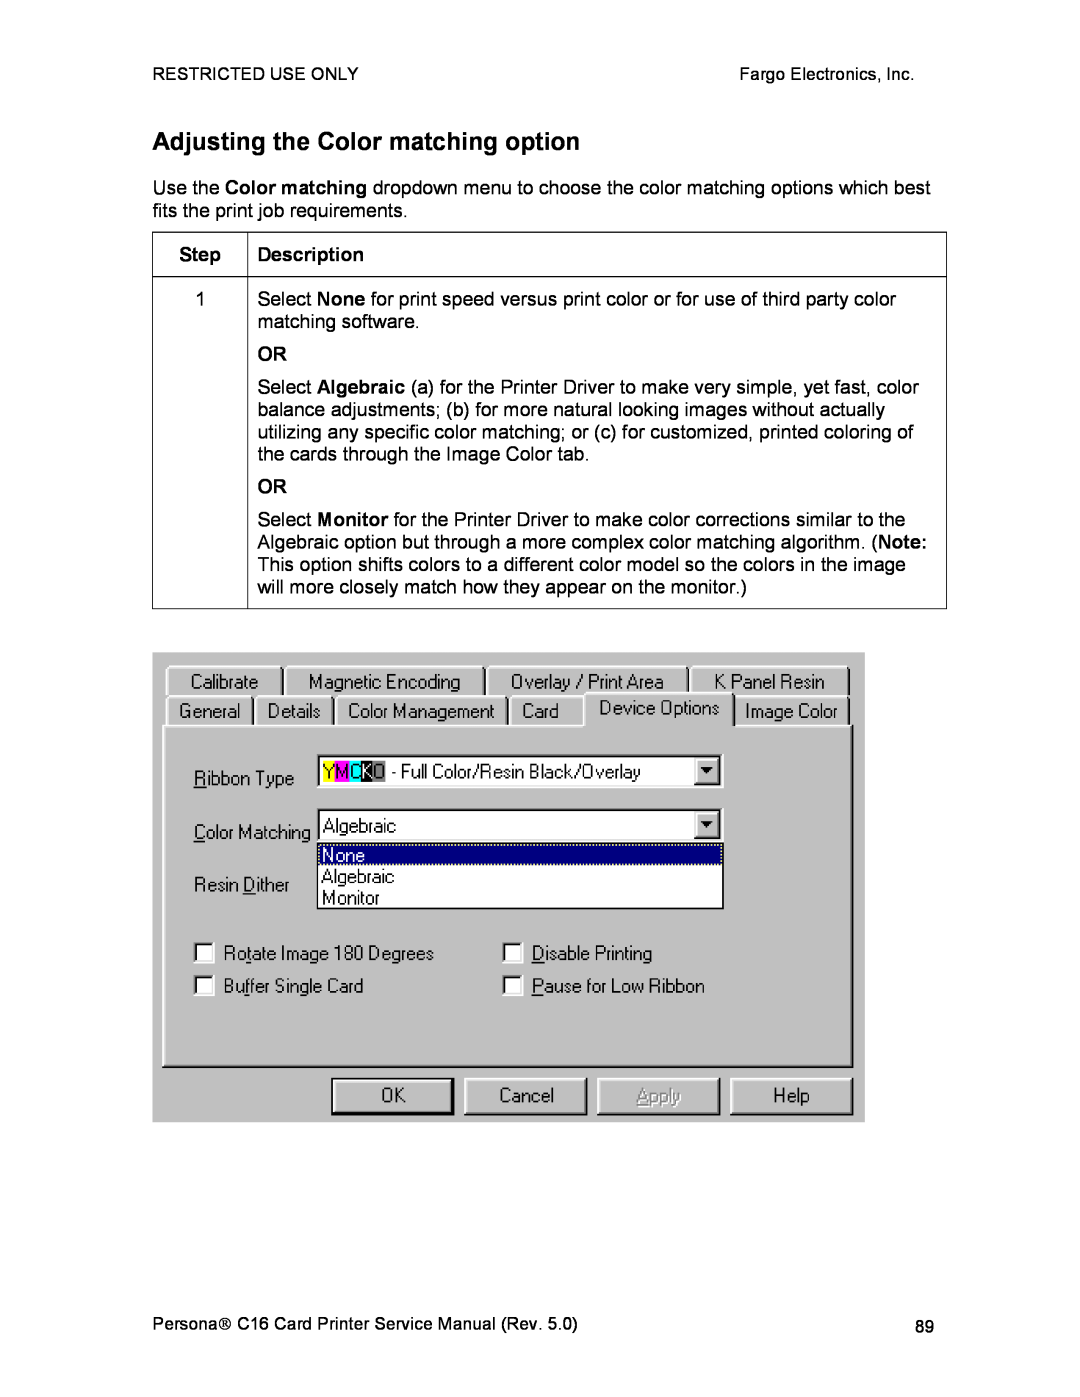 FARGO electronic C16 service manual Adjusting the Color matching option 